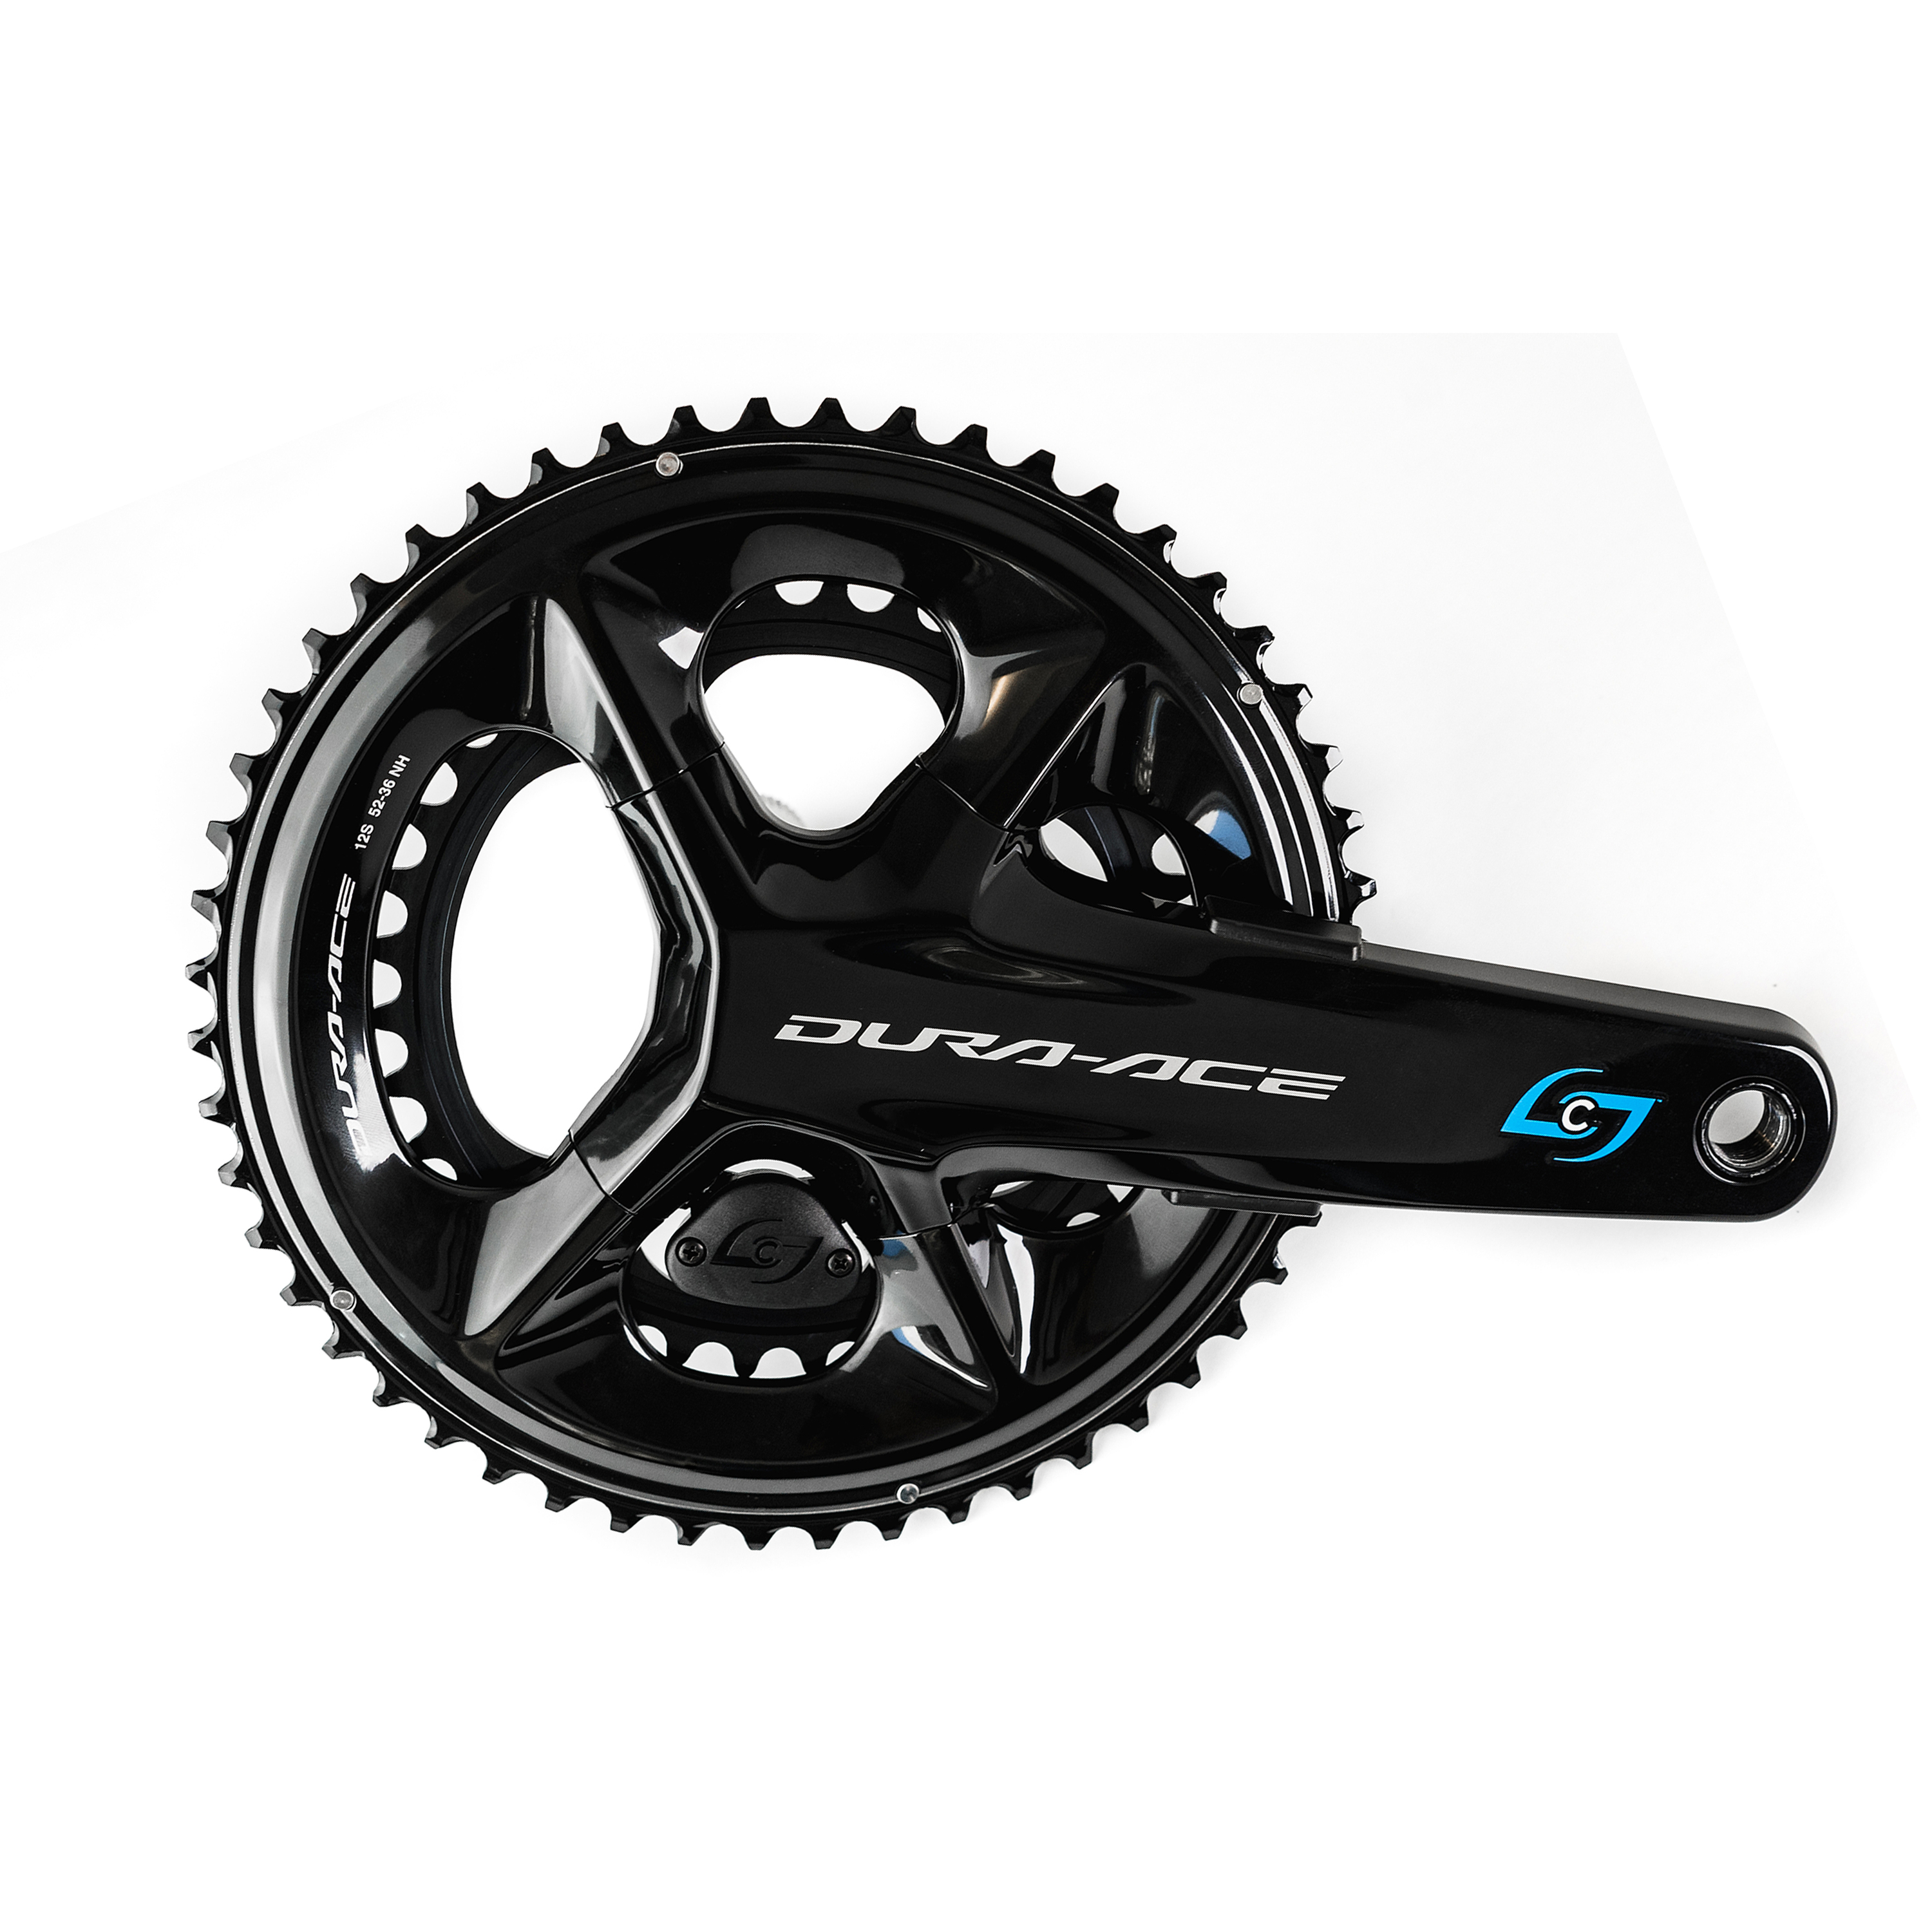 stages cycling kurbeln stages power r - shimano dura-ace r9200 noir uomo